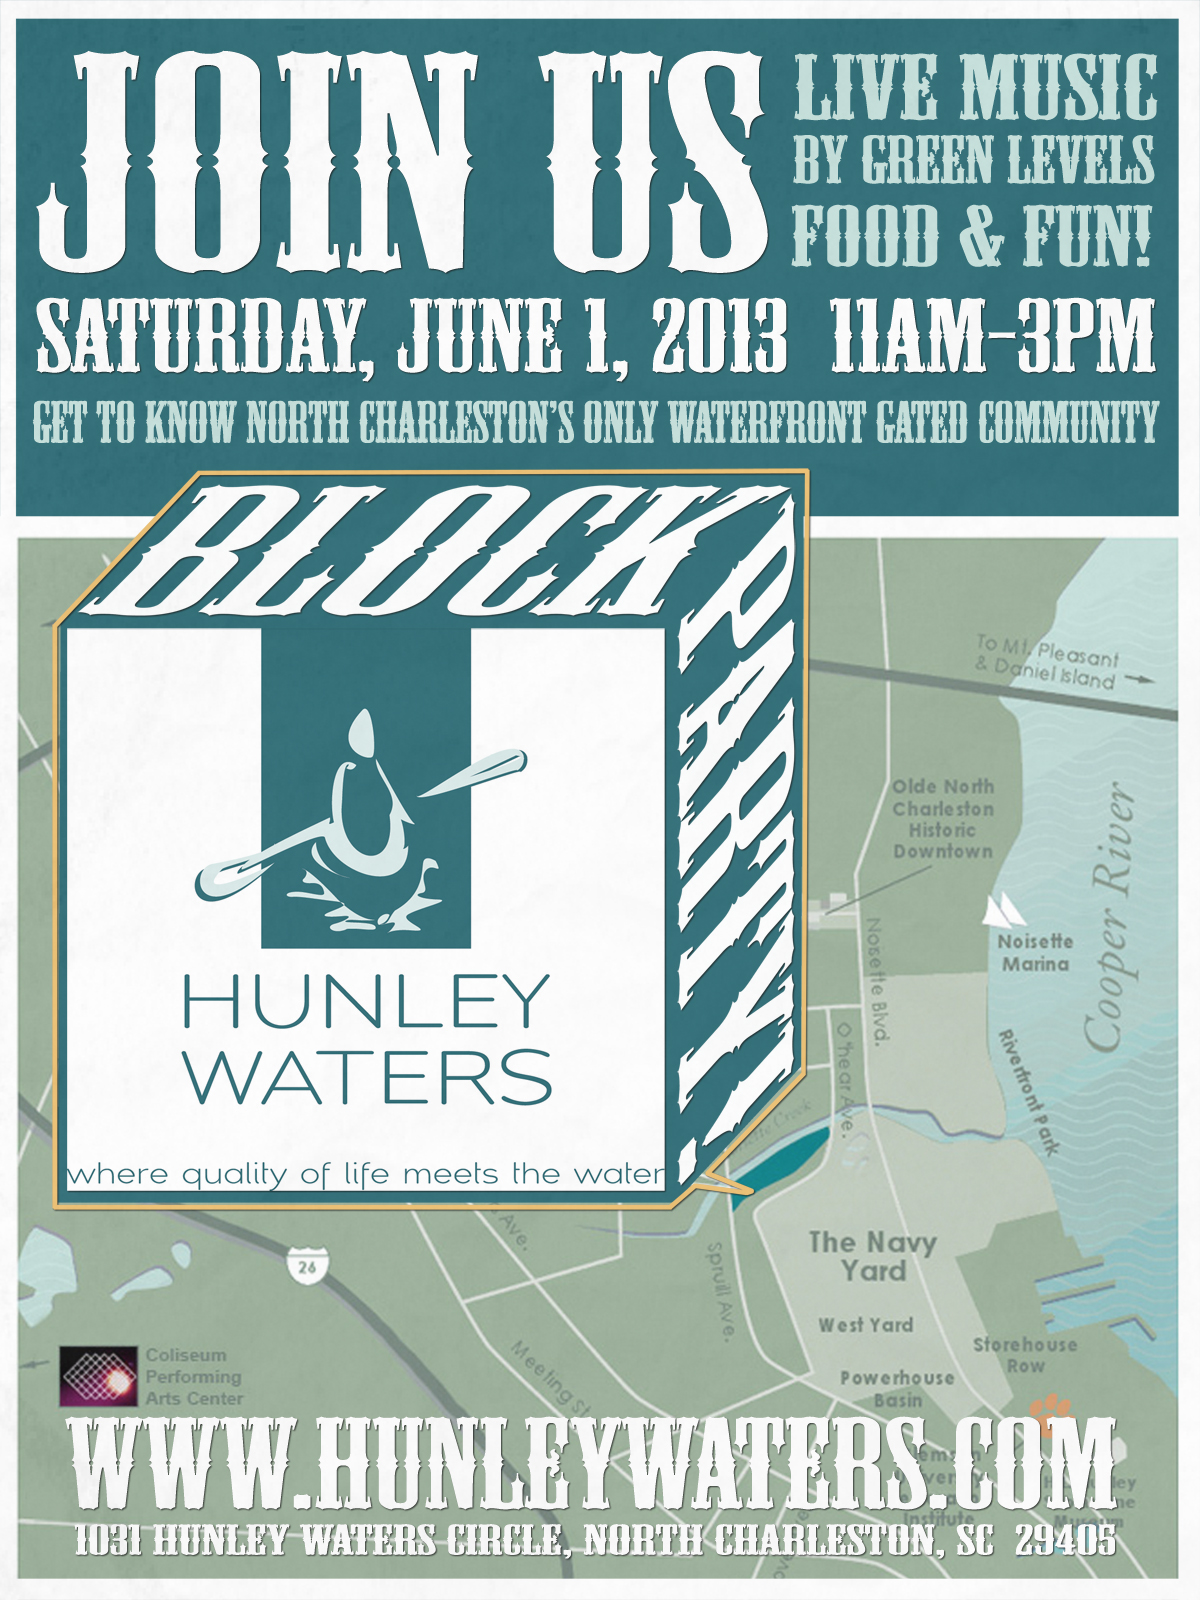 Hunley Waters Block Party! - June 1, 2013 - Real Deal with Neil